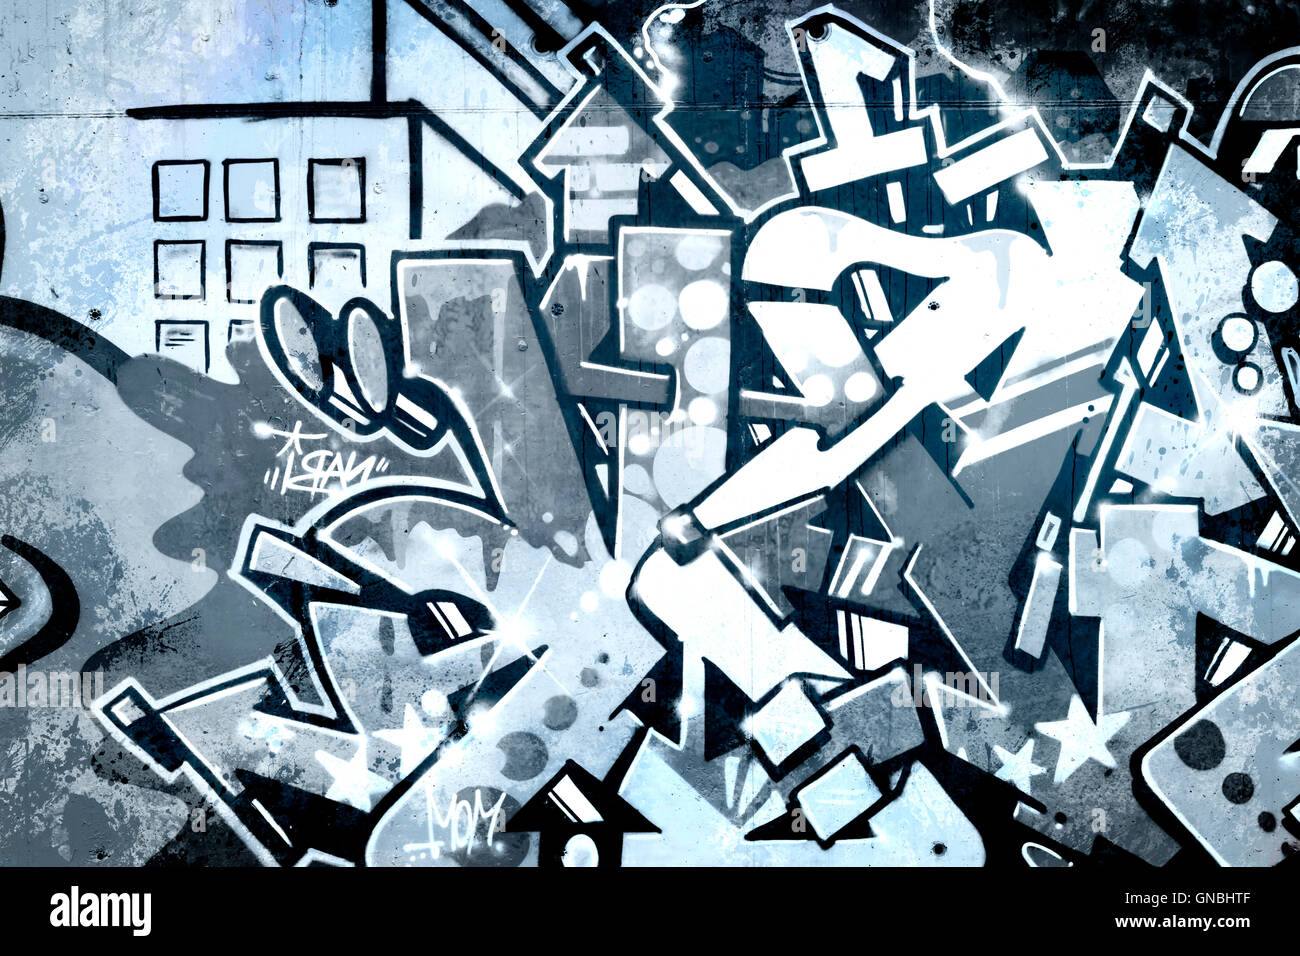 Graffiti over old dirty wall, urban hip hop background Gray text Stock  Photo - Alamy